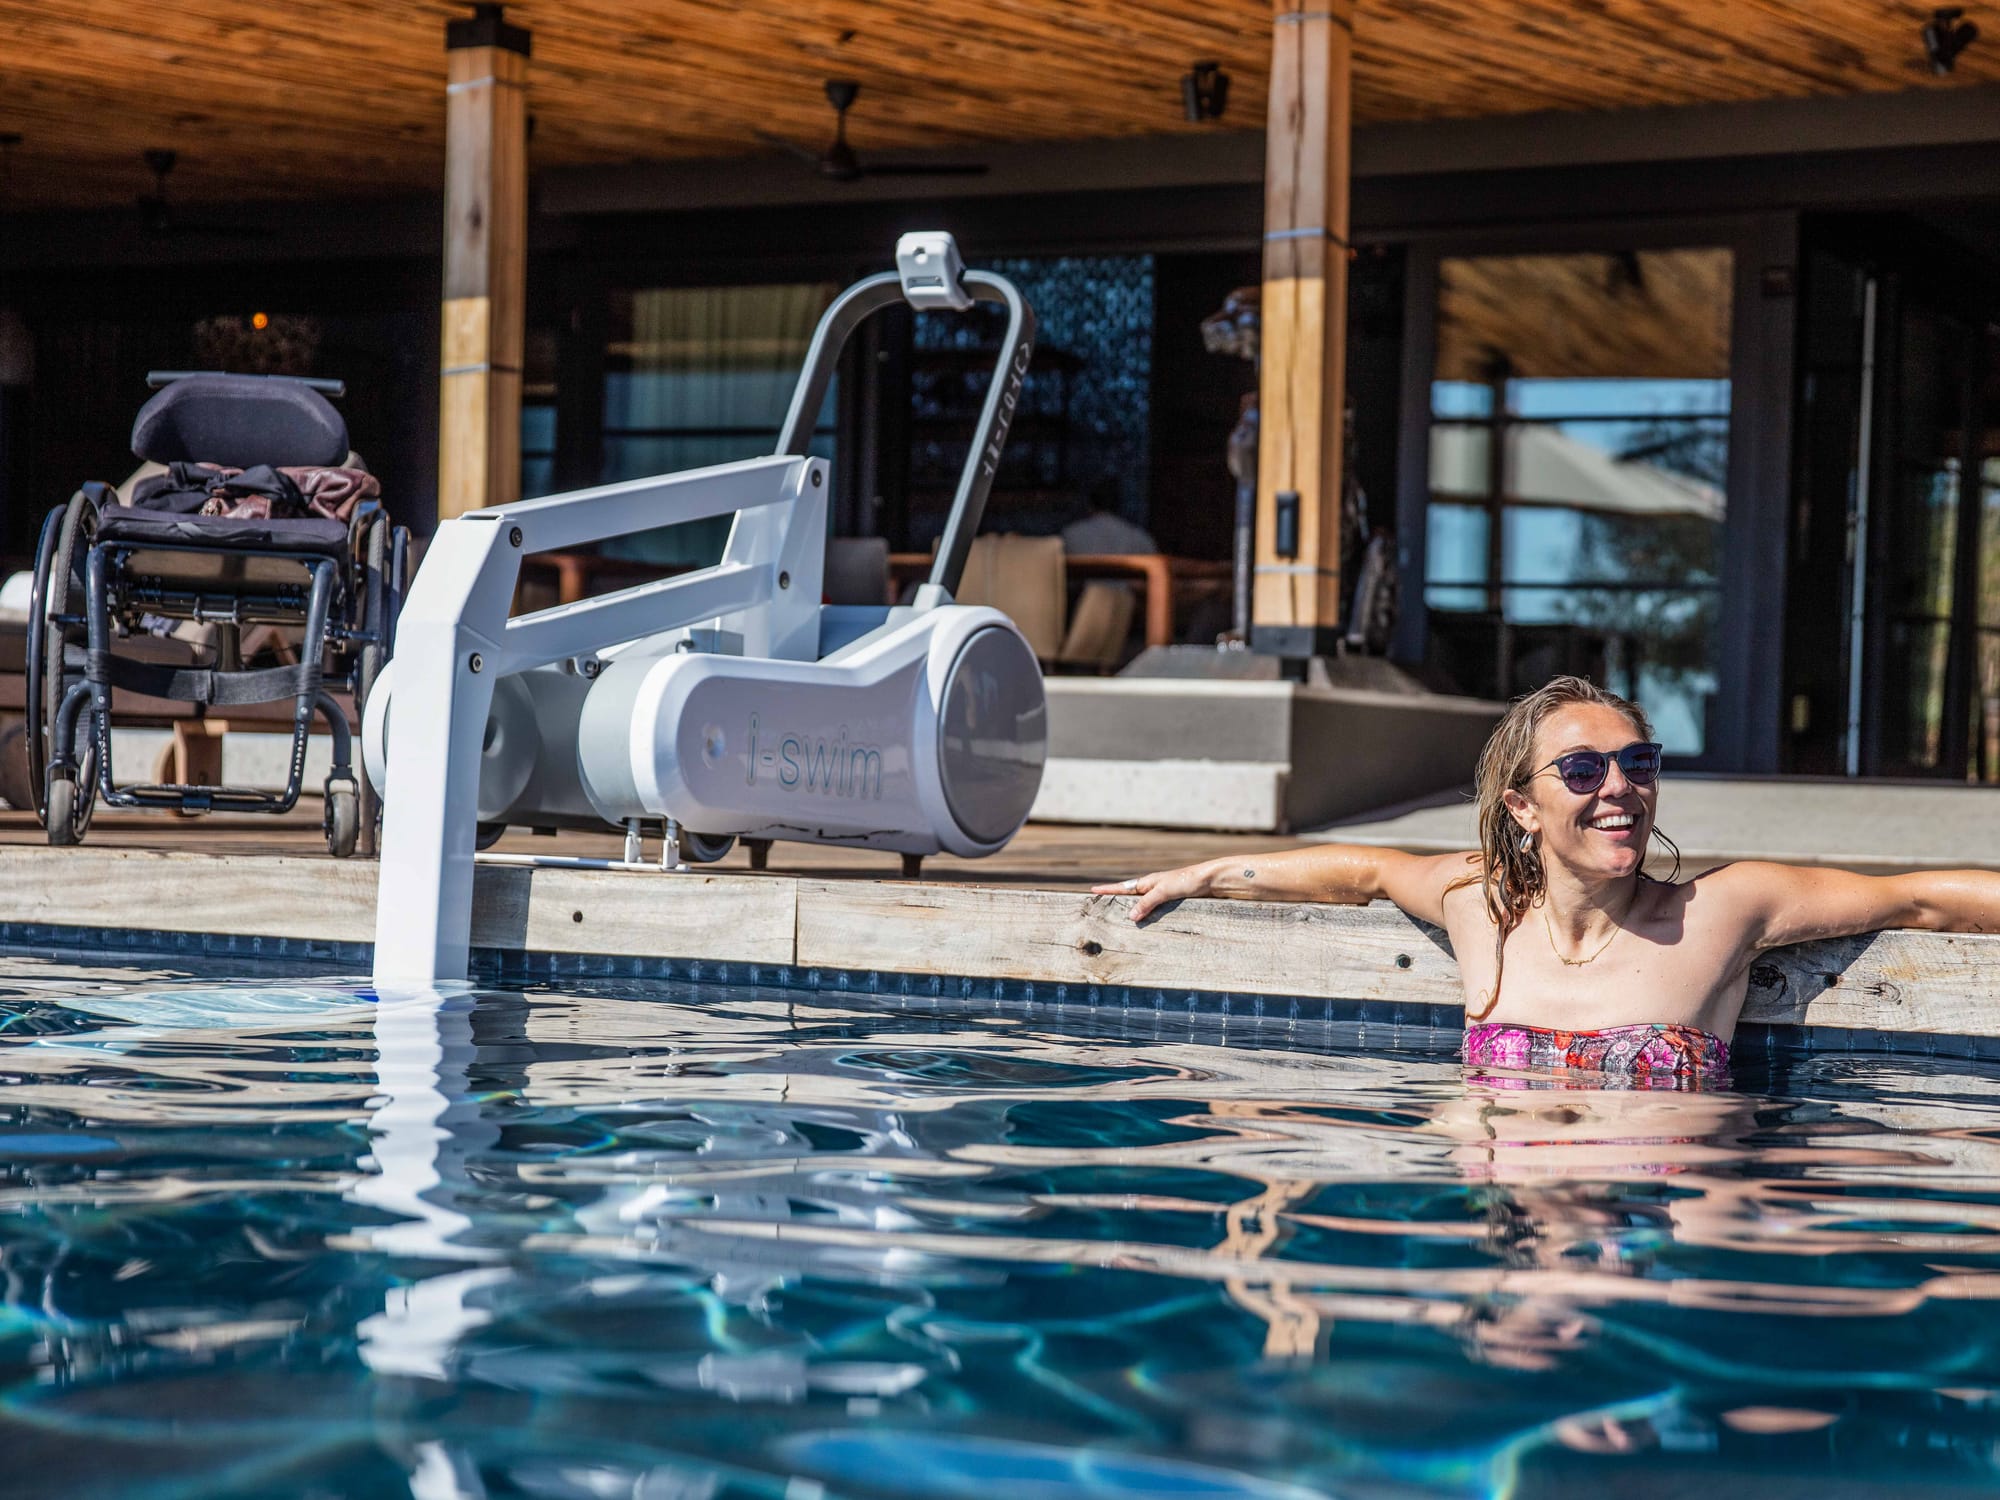 Sophie Morgan enjoying the pool amenities with a pool lift in South Africa